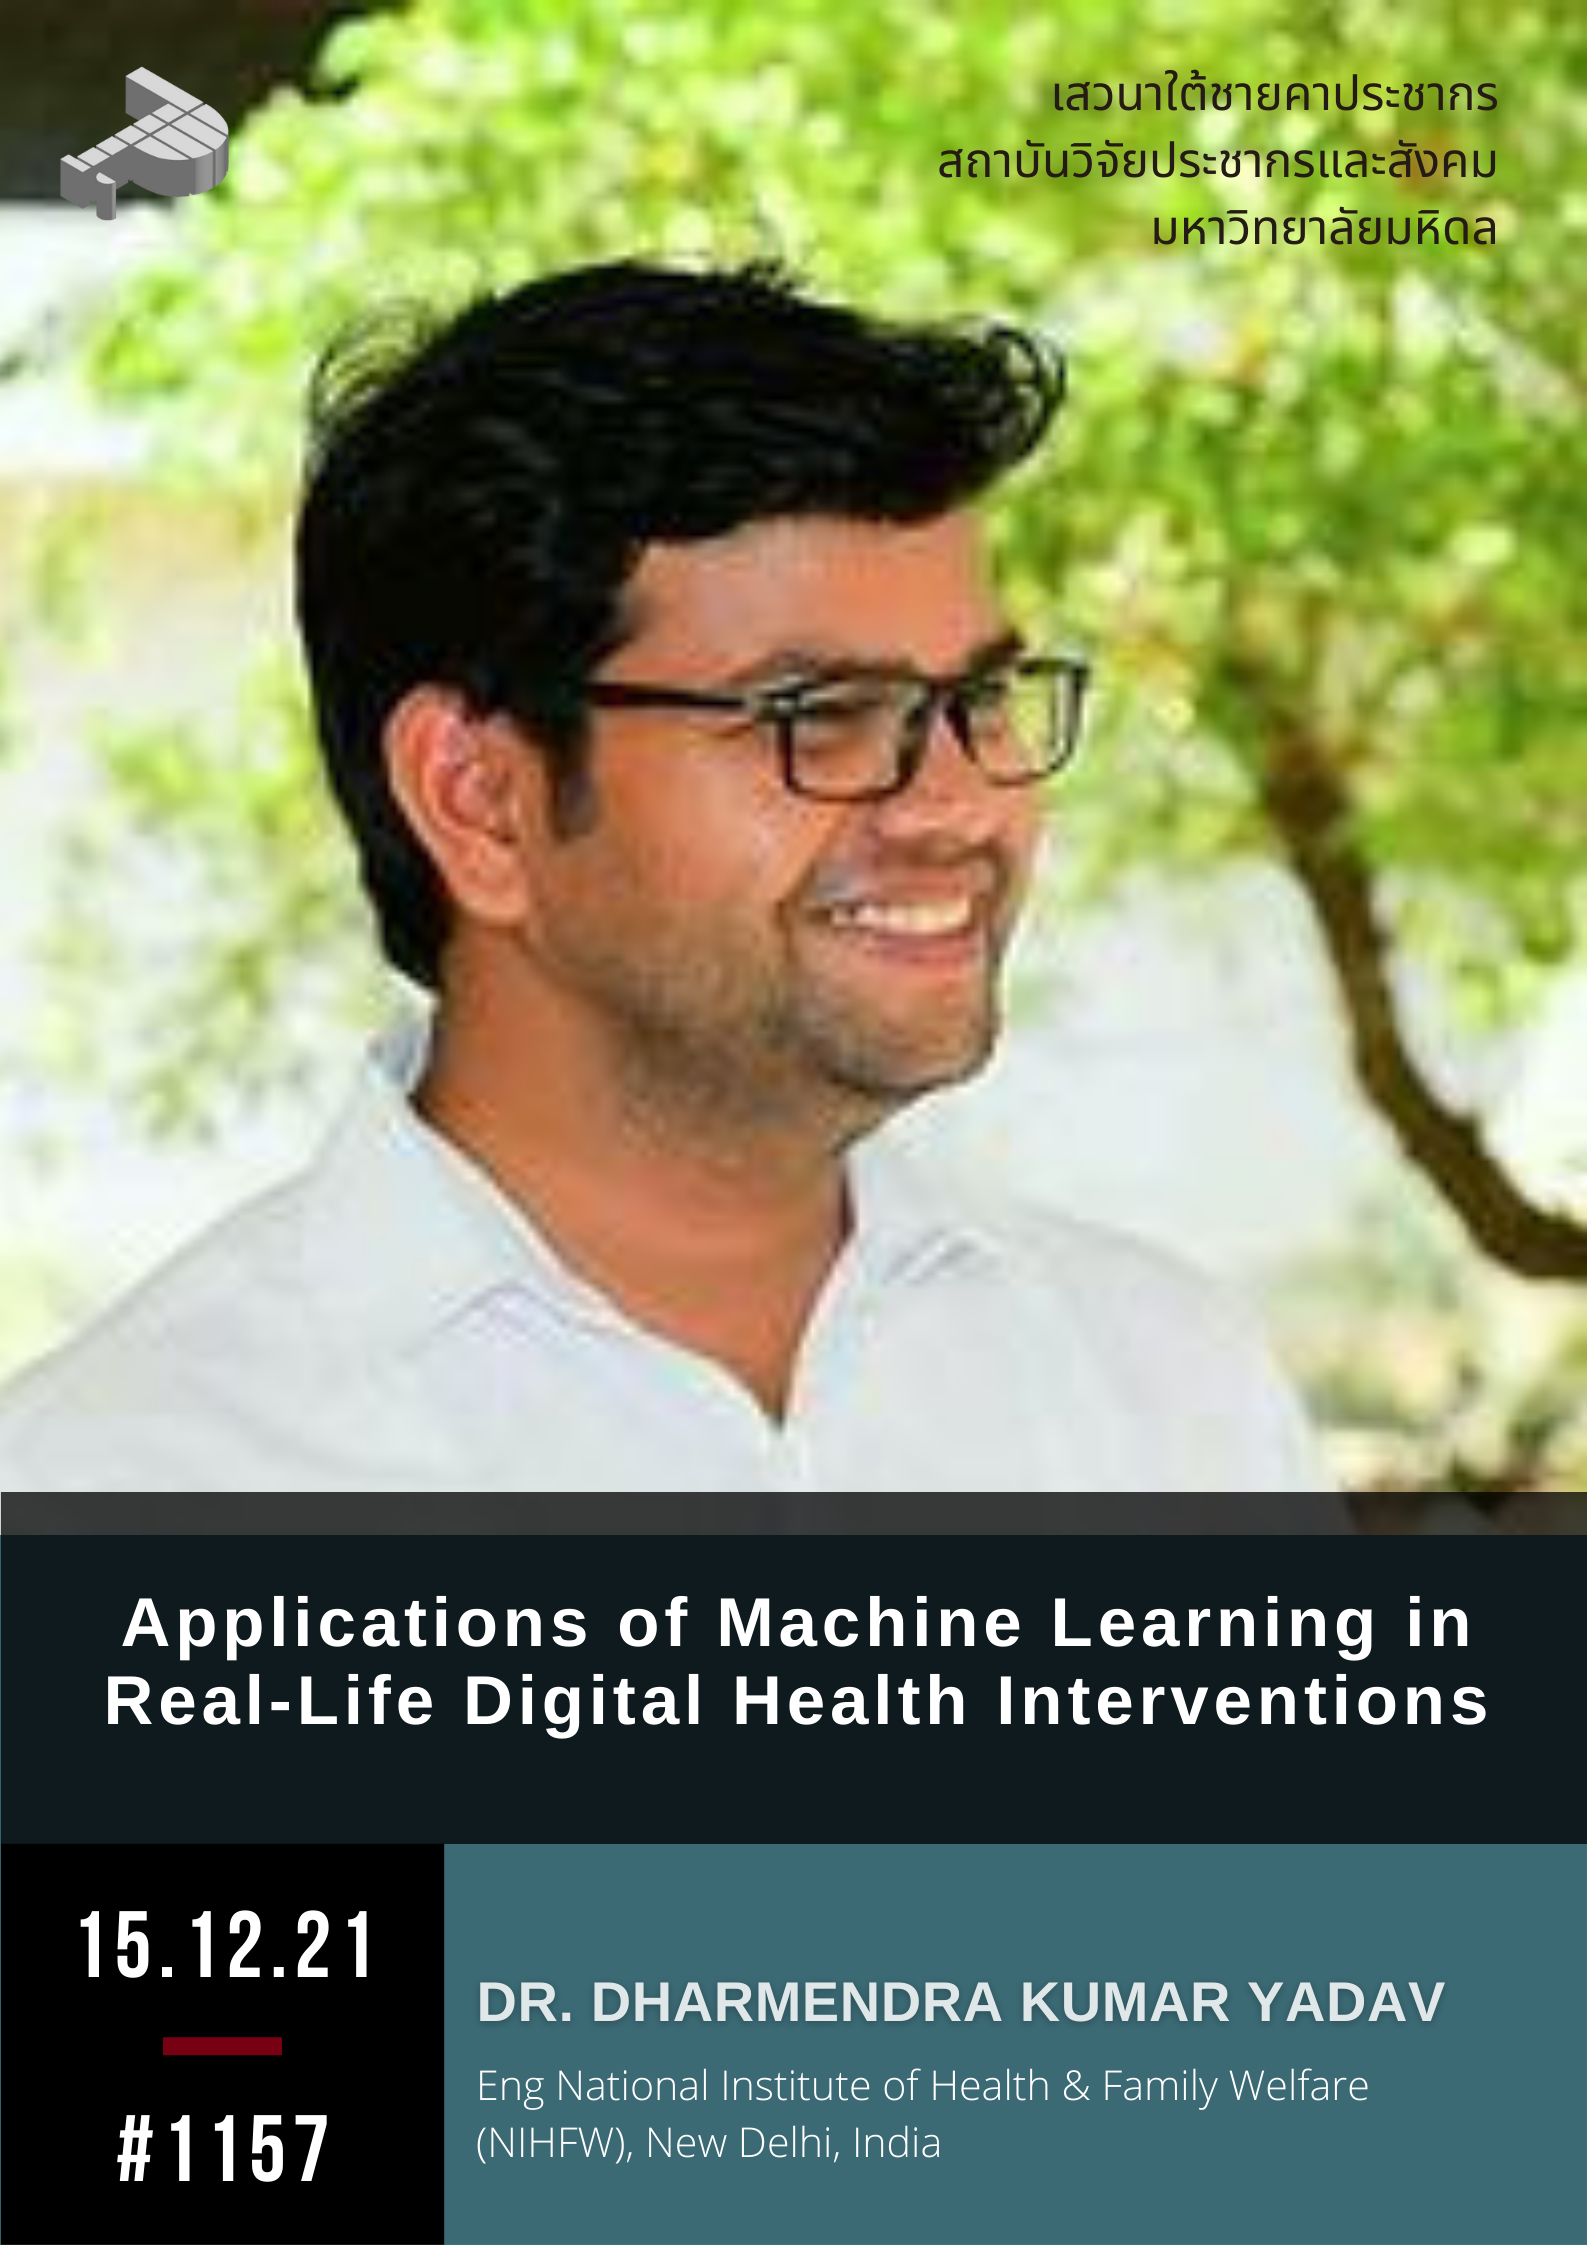 Applications of Machine Learning in Real-Life Digital Health Interventions